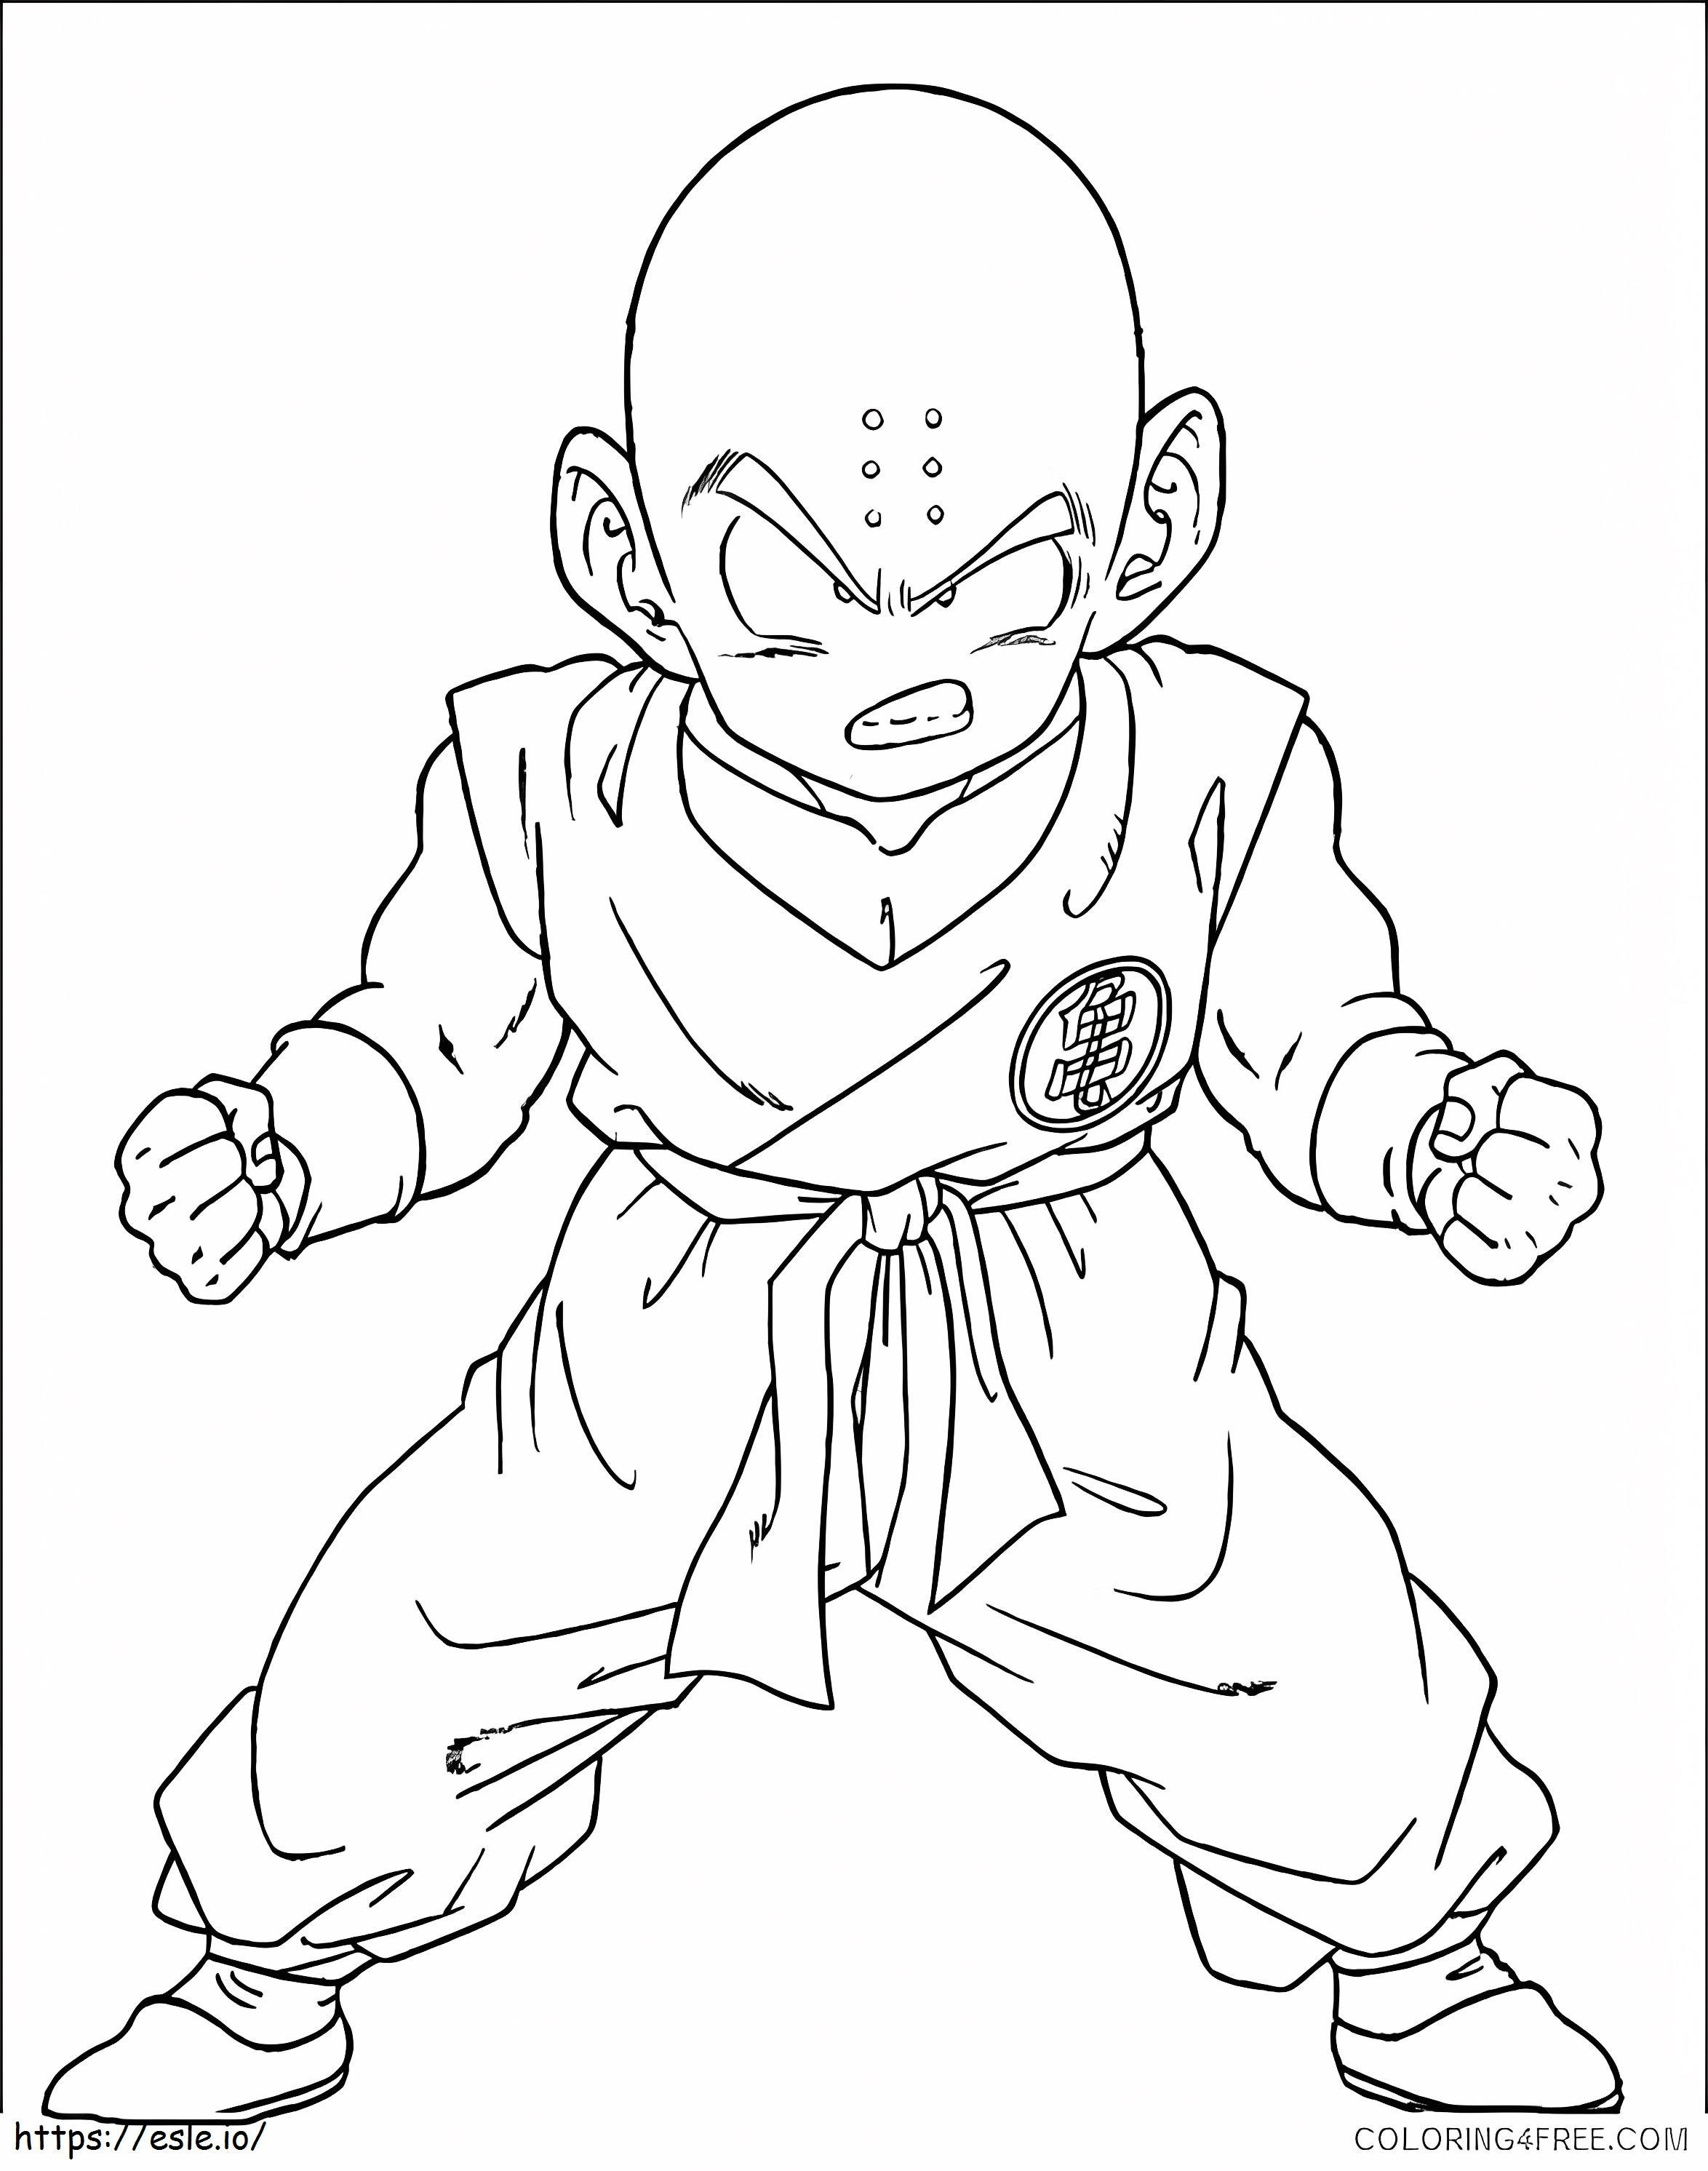 Krillin coloring page